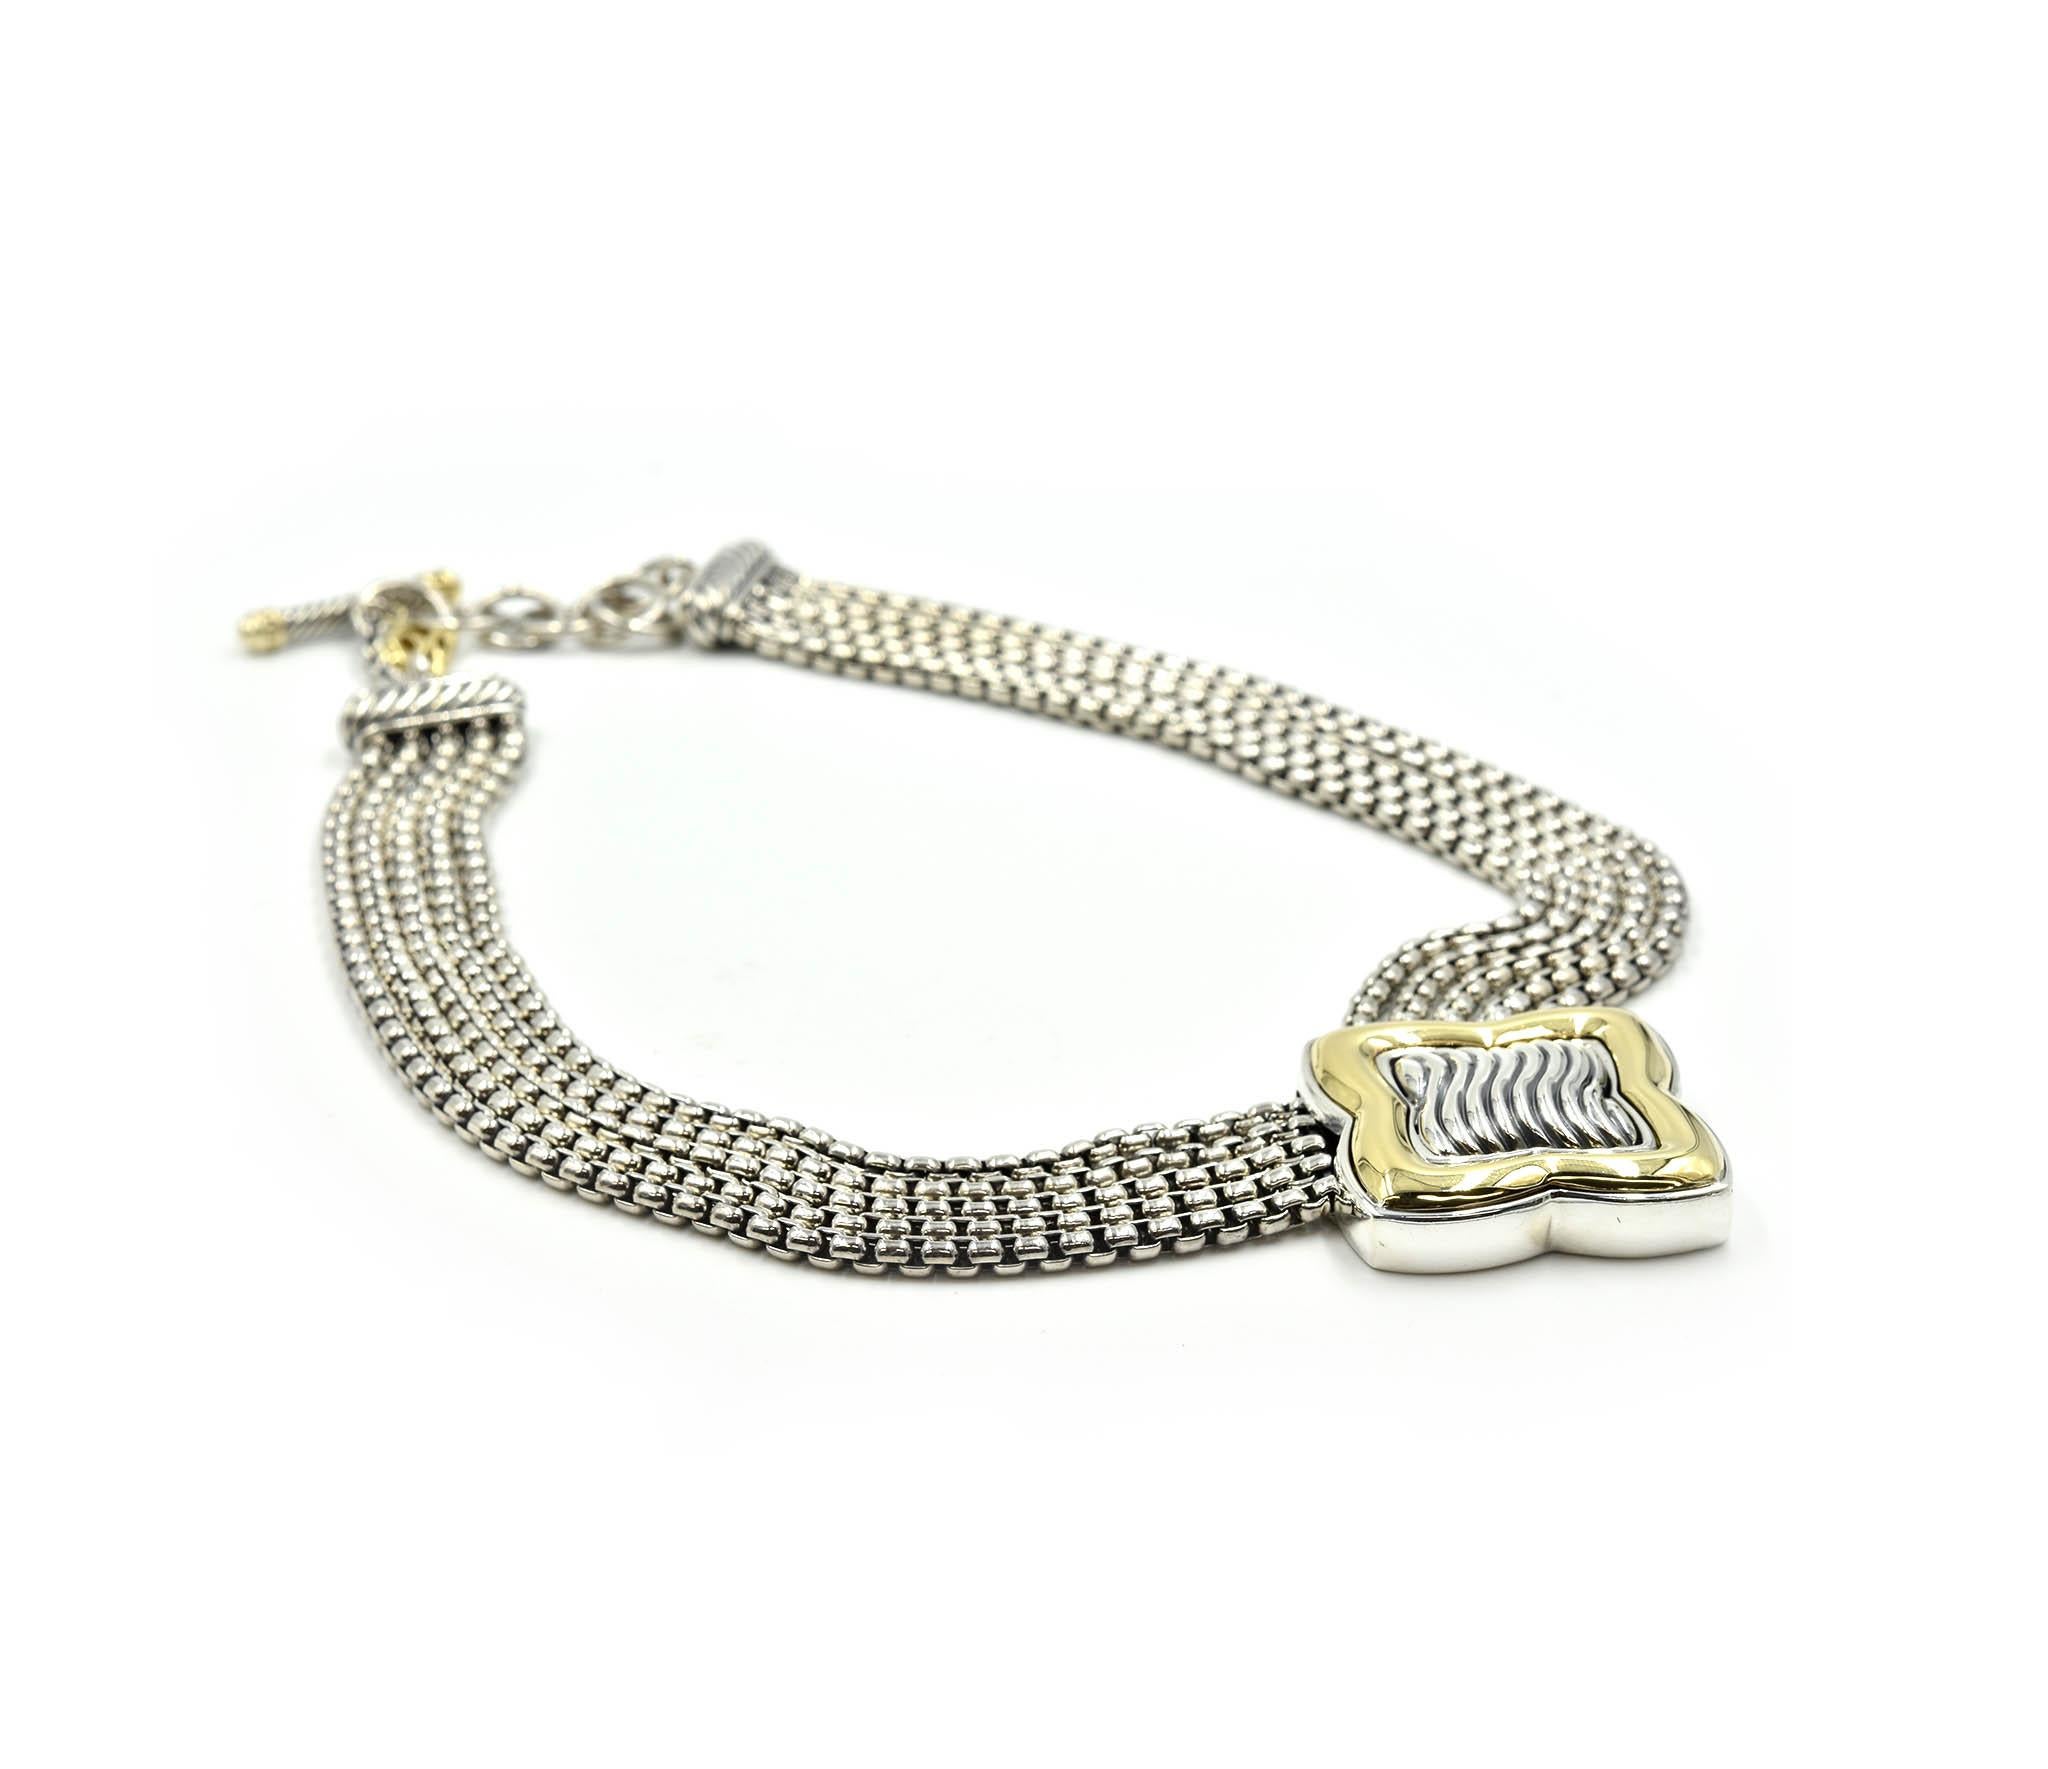 
Amazing craftsmanship by designer David Yurman! This necklace consists of multiple strands of sterling silver box links. Each row of links consists of five high polished box chains. Once the 17” inches of sterling silver completes there is a toggle